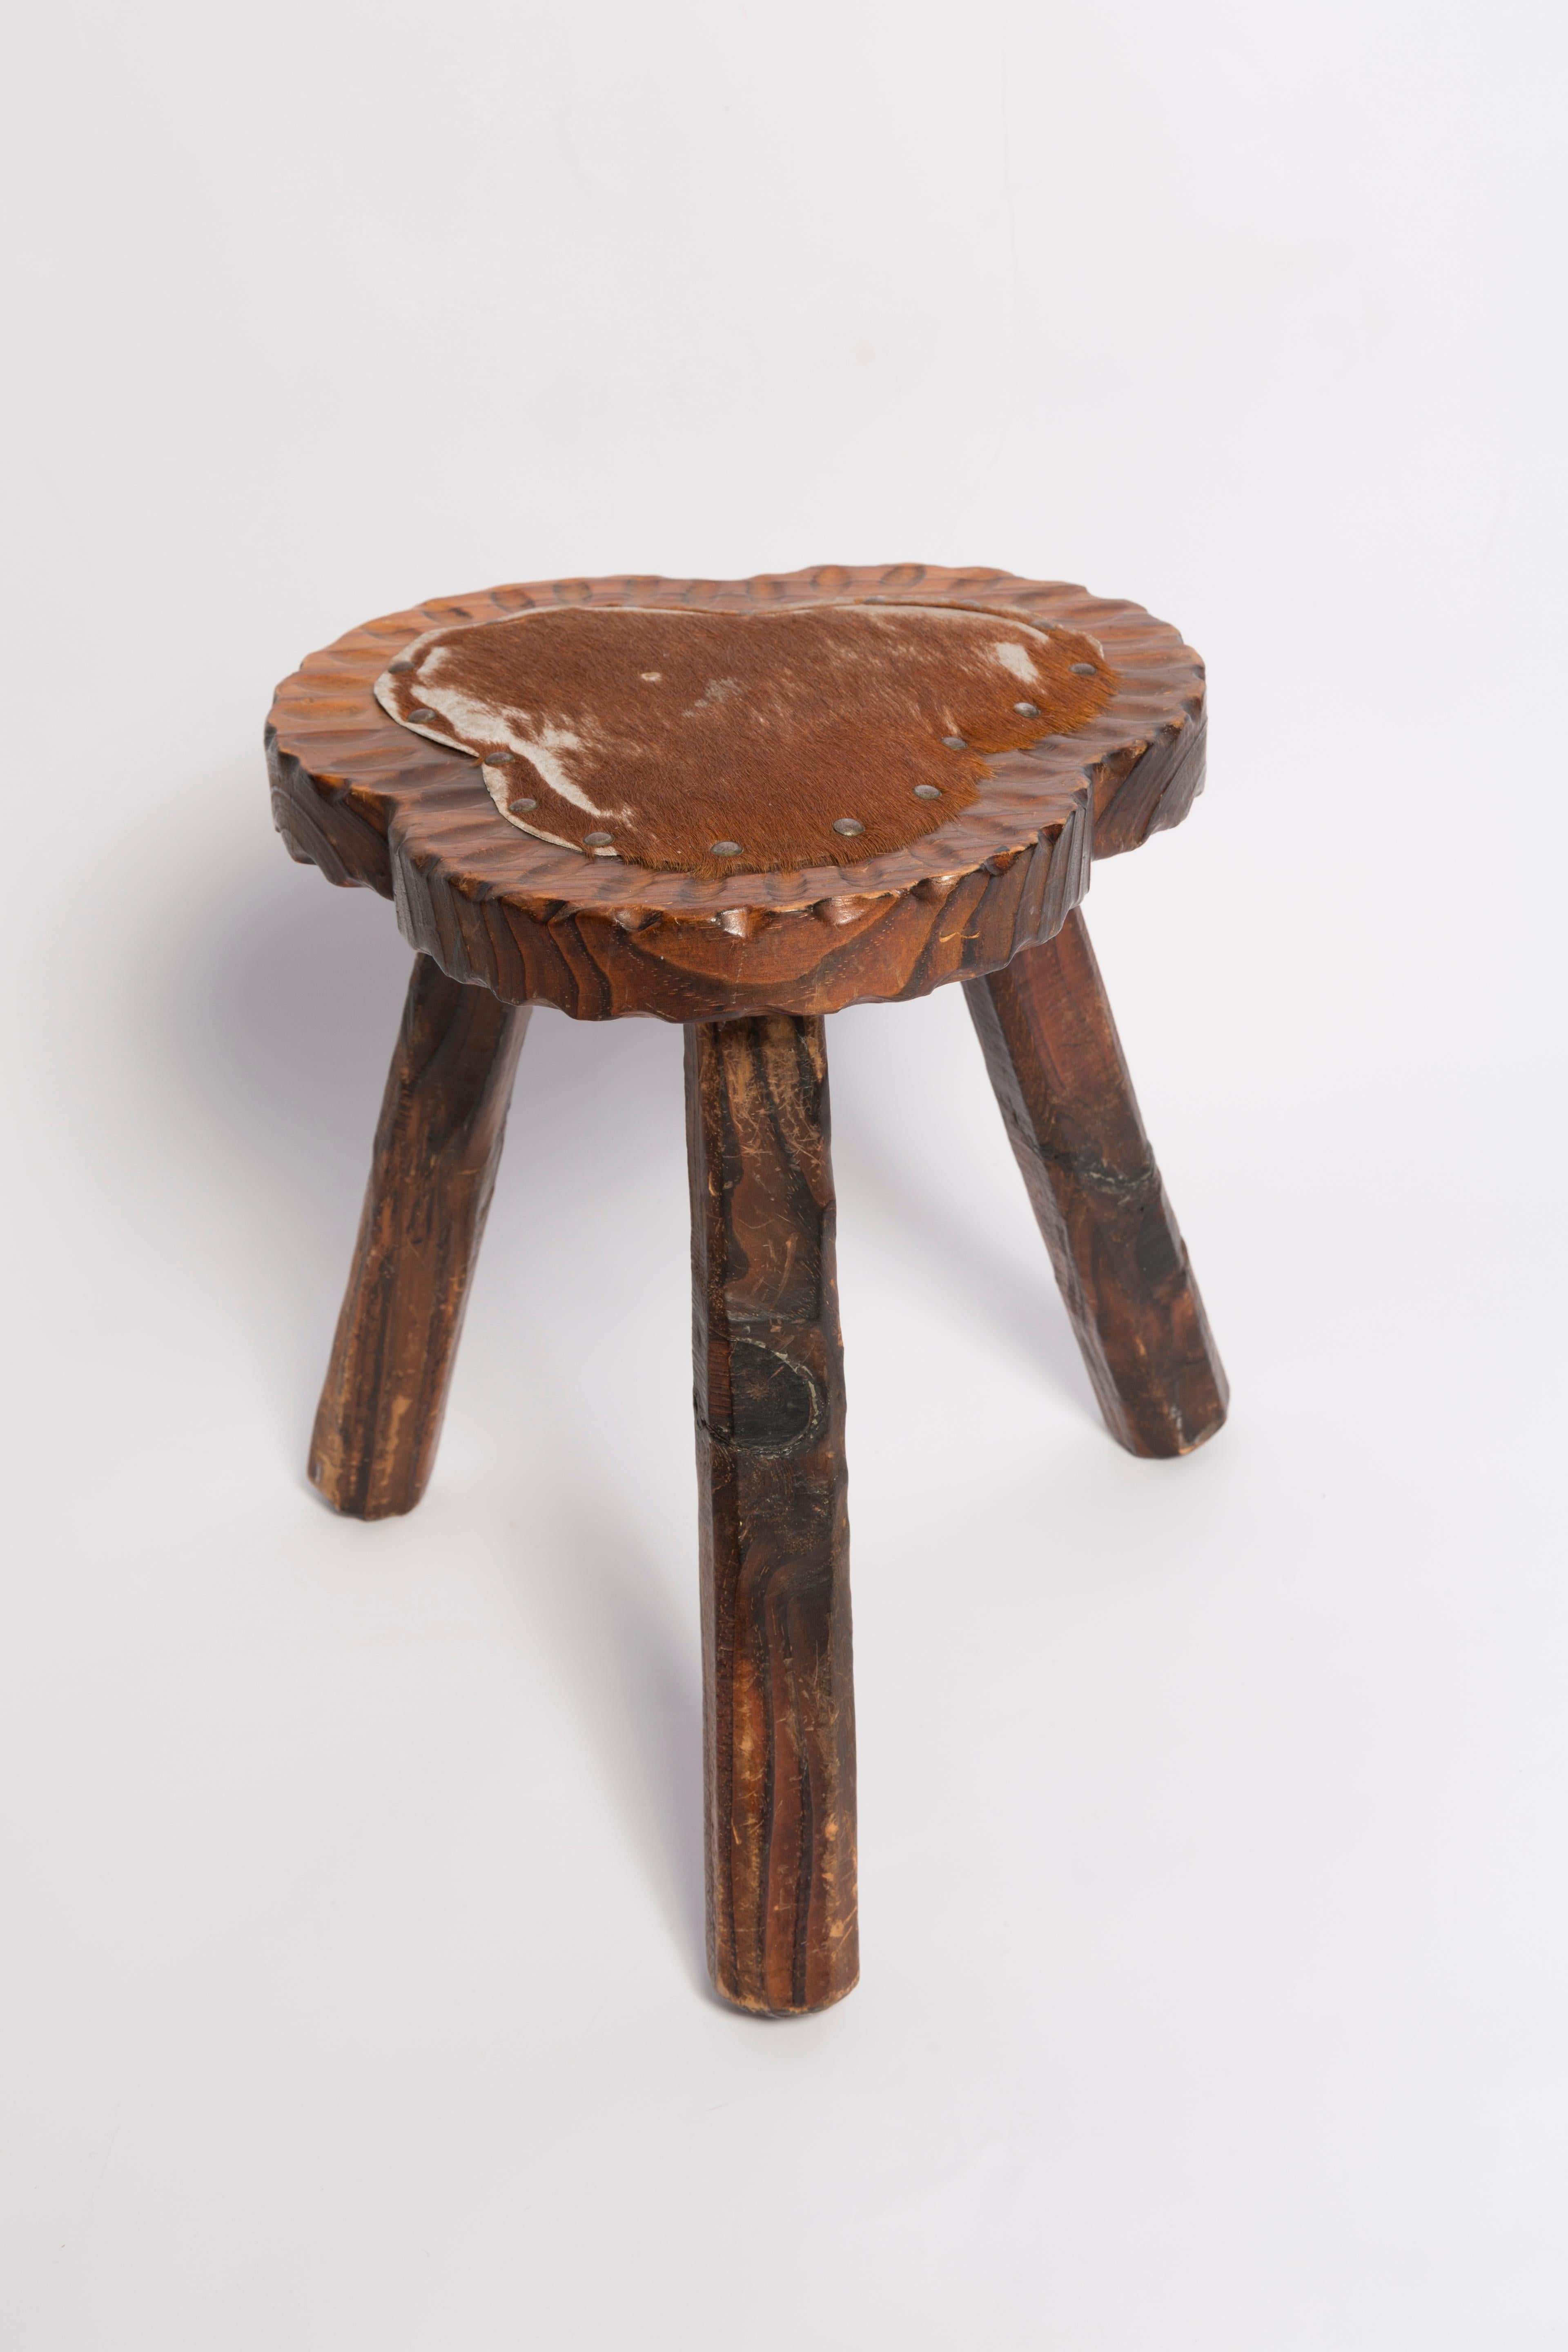 Stool from the turn of the 1960s. Cow fur on the seat. The stool consists of an upholstered part, a seat and wooden legs narrowing downwards, characteristic of the 1960s style. The stool is original very good vintage condition. Only one unique piece.